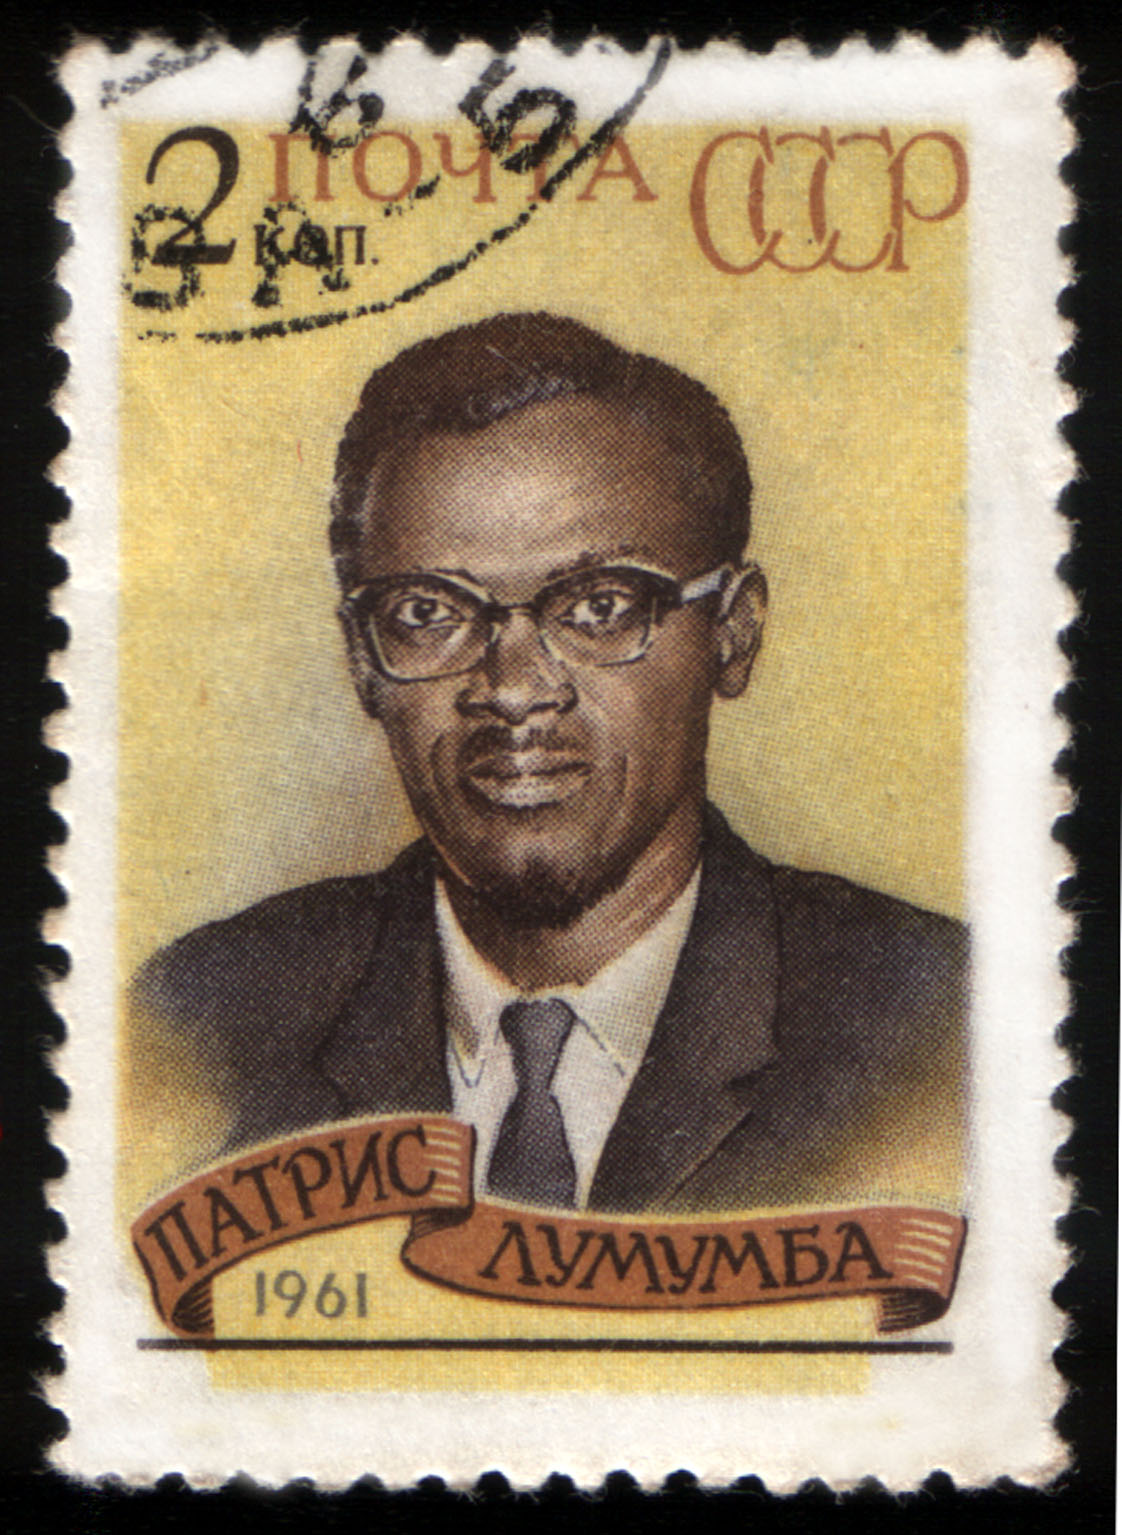 Coloured image of a stamp of a man with glasses.This work is not an object of copyright according to article 1259 of Book IV of the Civil Code of the Russian Federation No. 230-FZ of December 18, 2006.